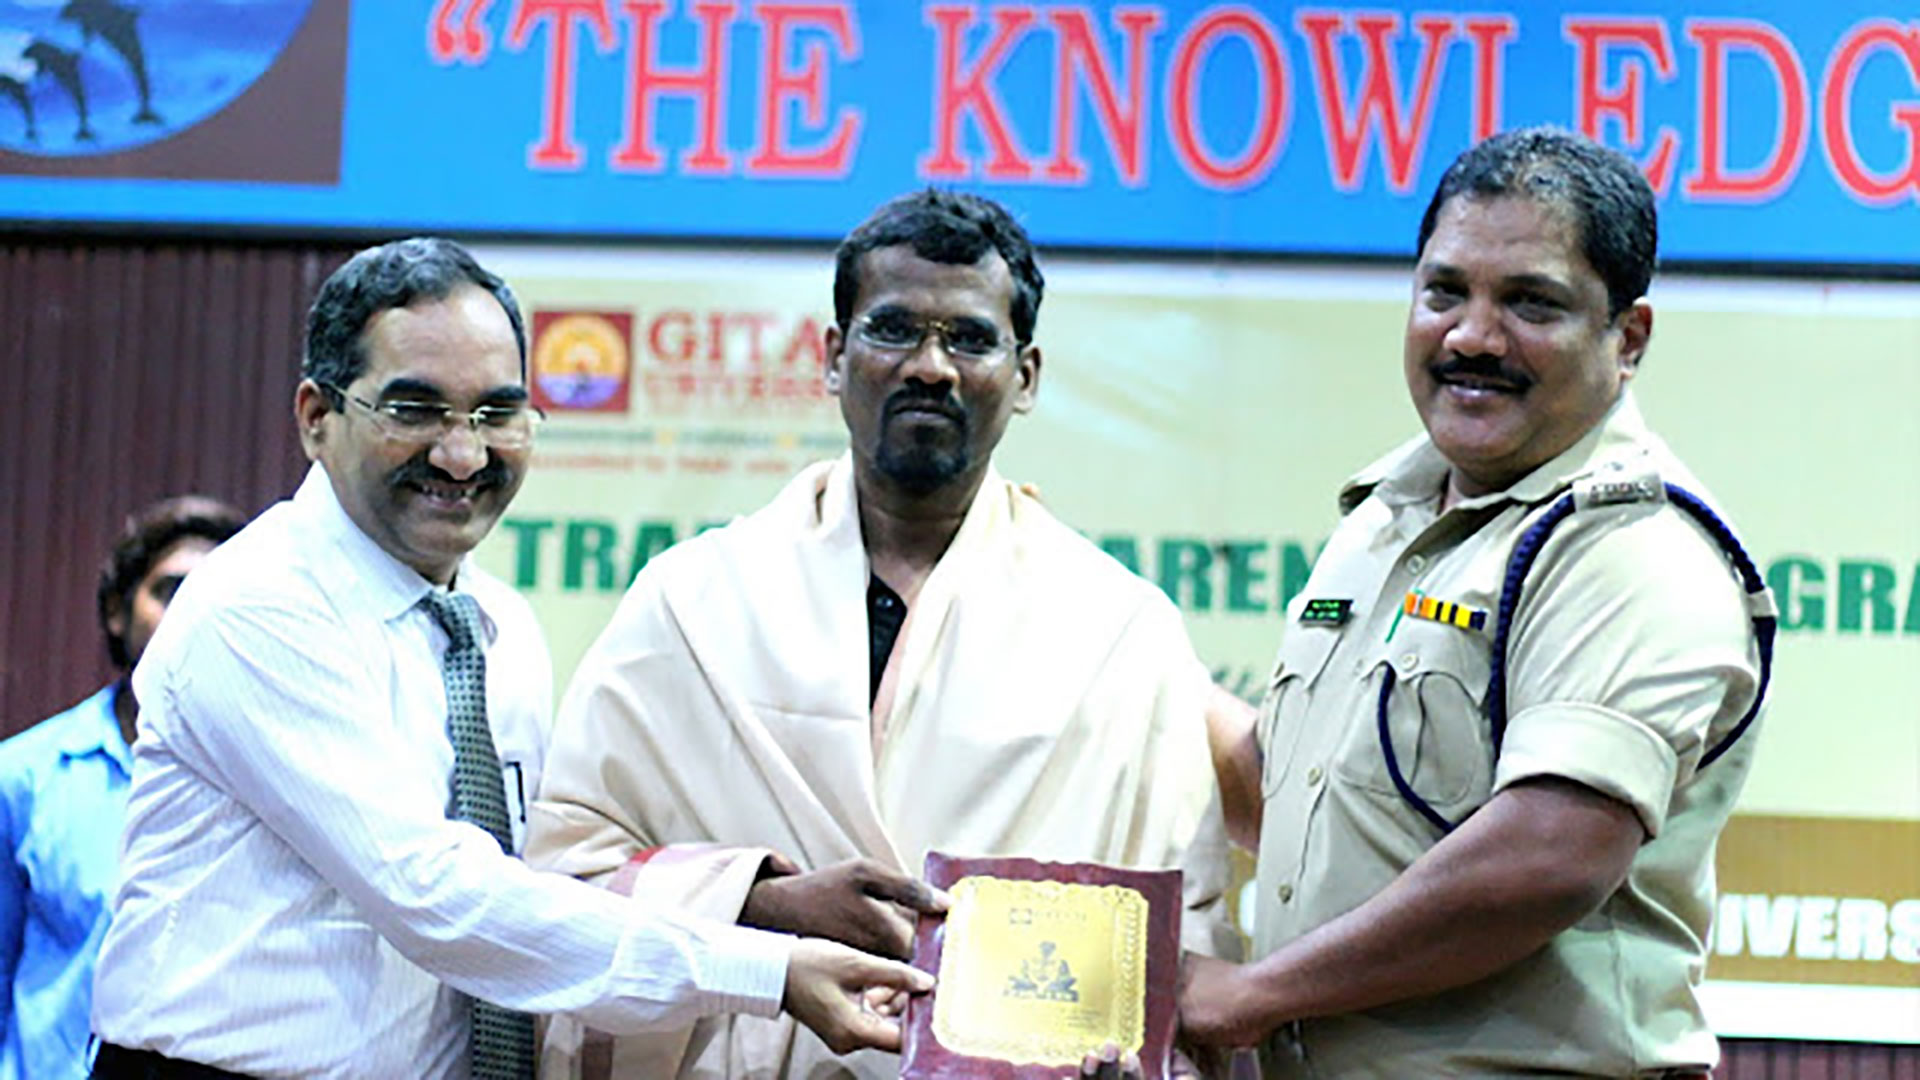 Felicitated for conducting Road Safety classes for 10,000 students